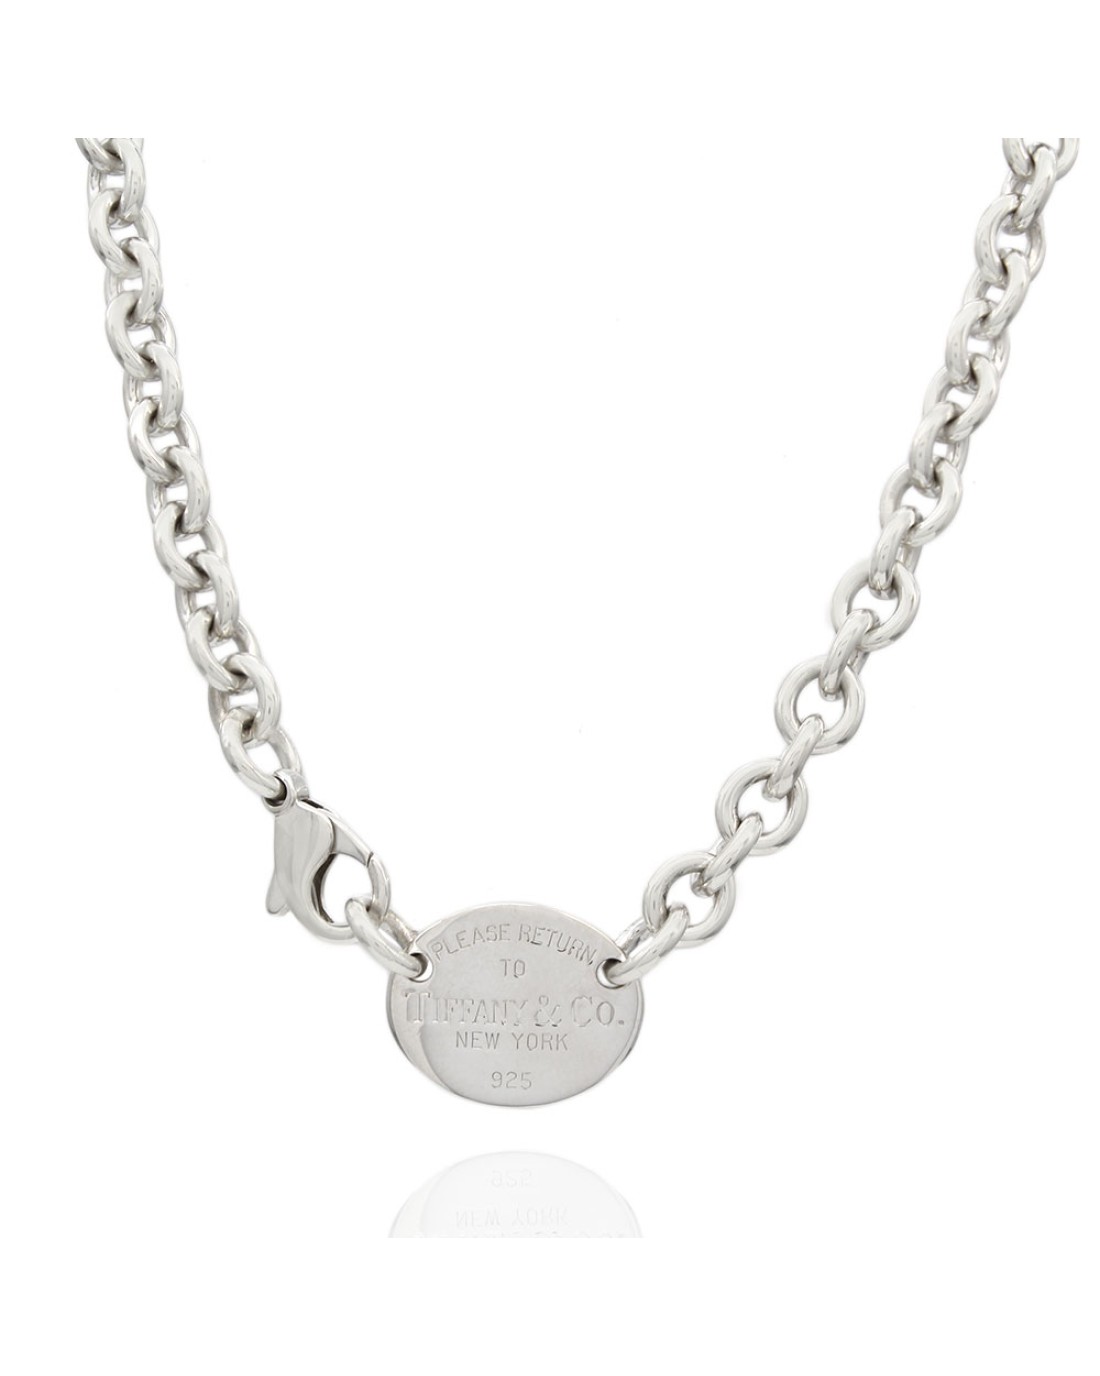 Tiffany & Co. Return to Tiffany Oval Tag Necklace in